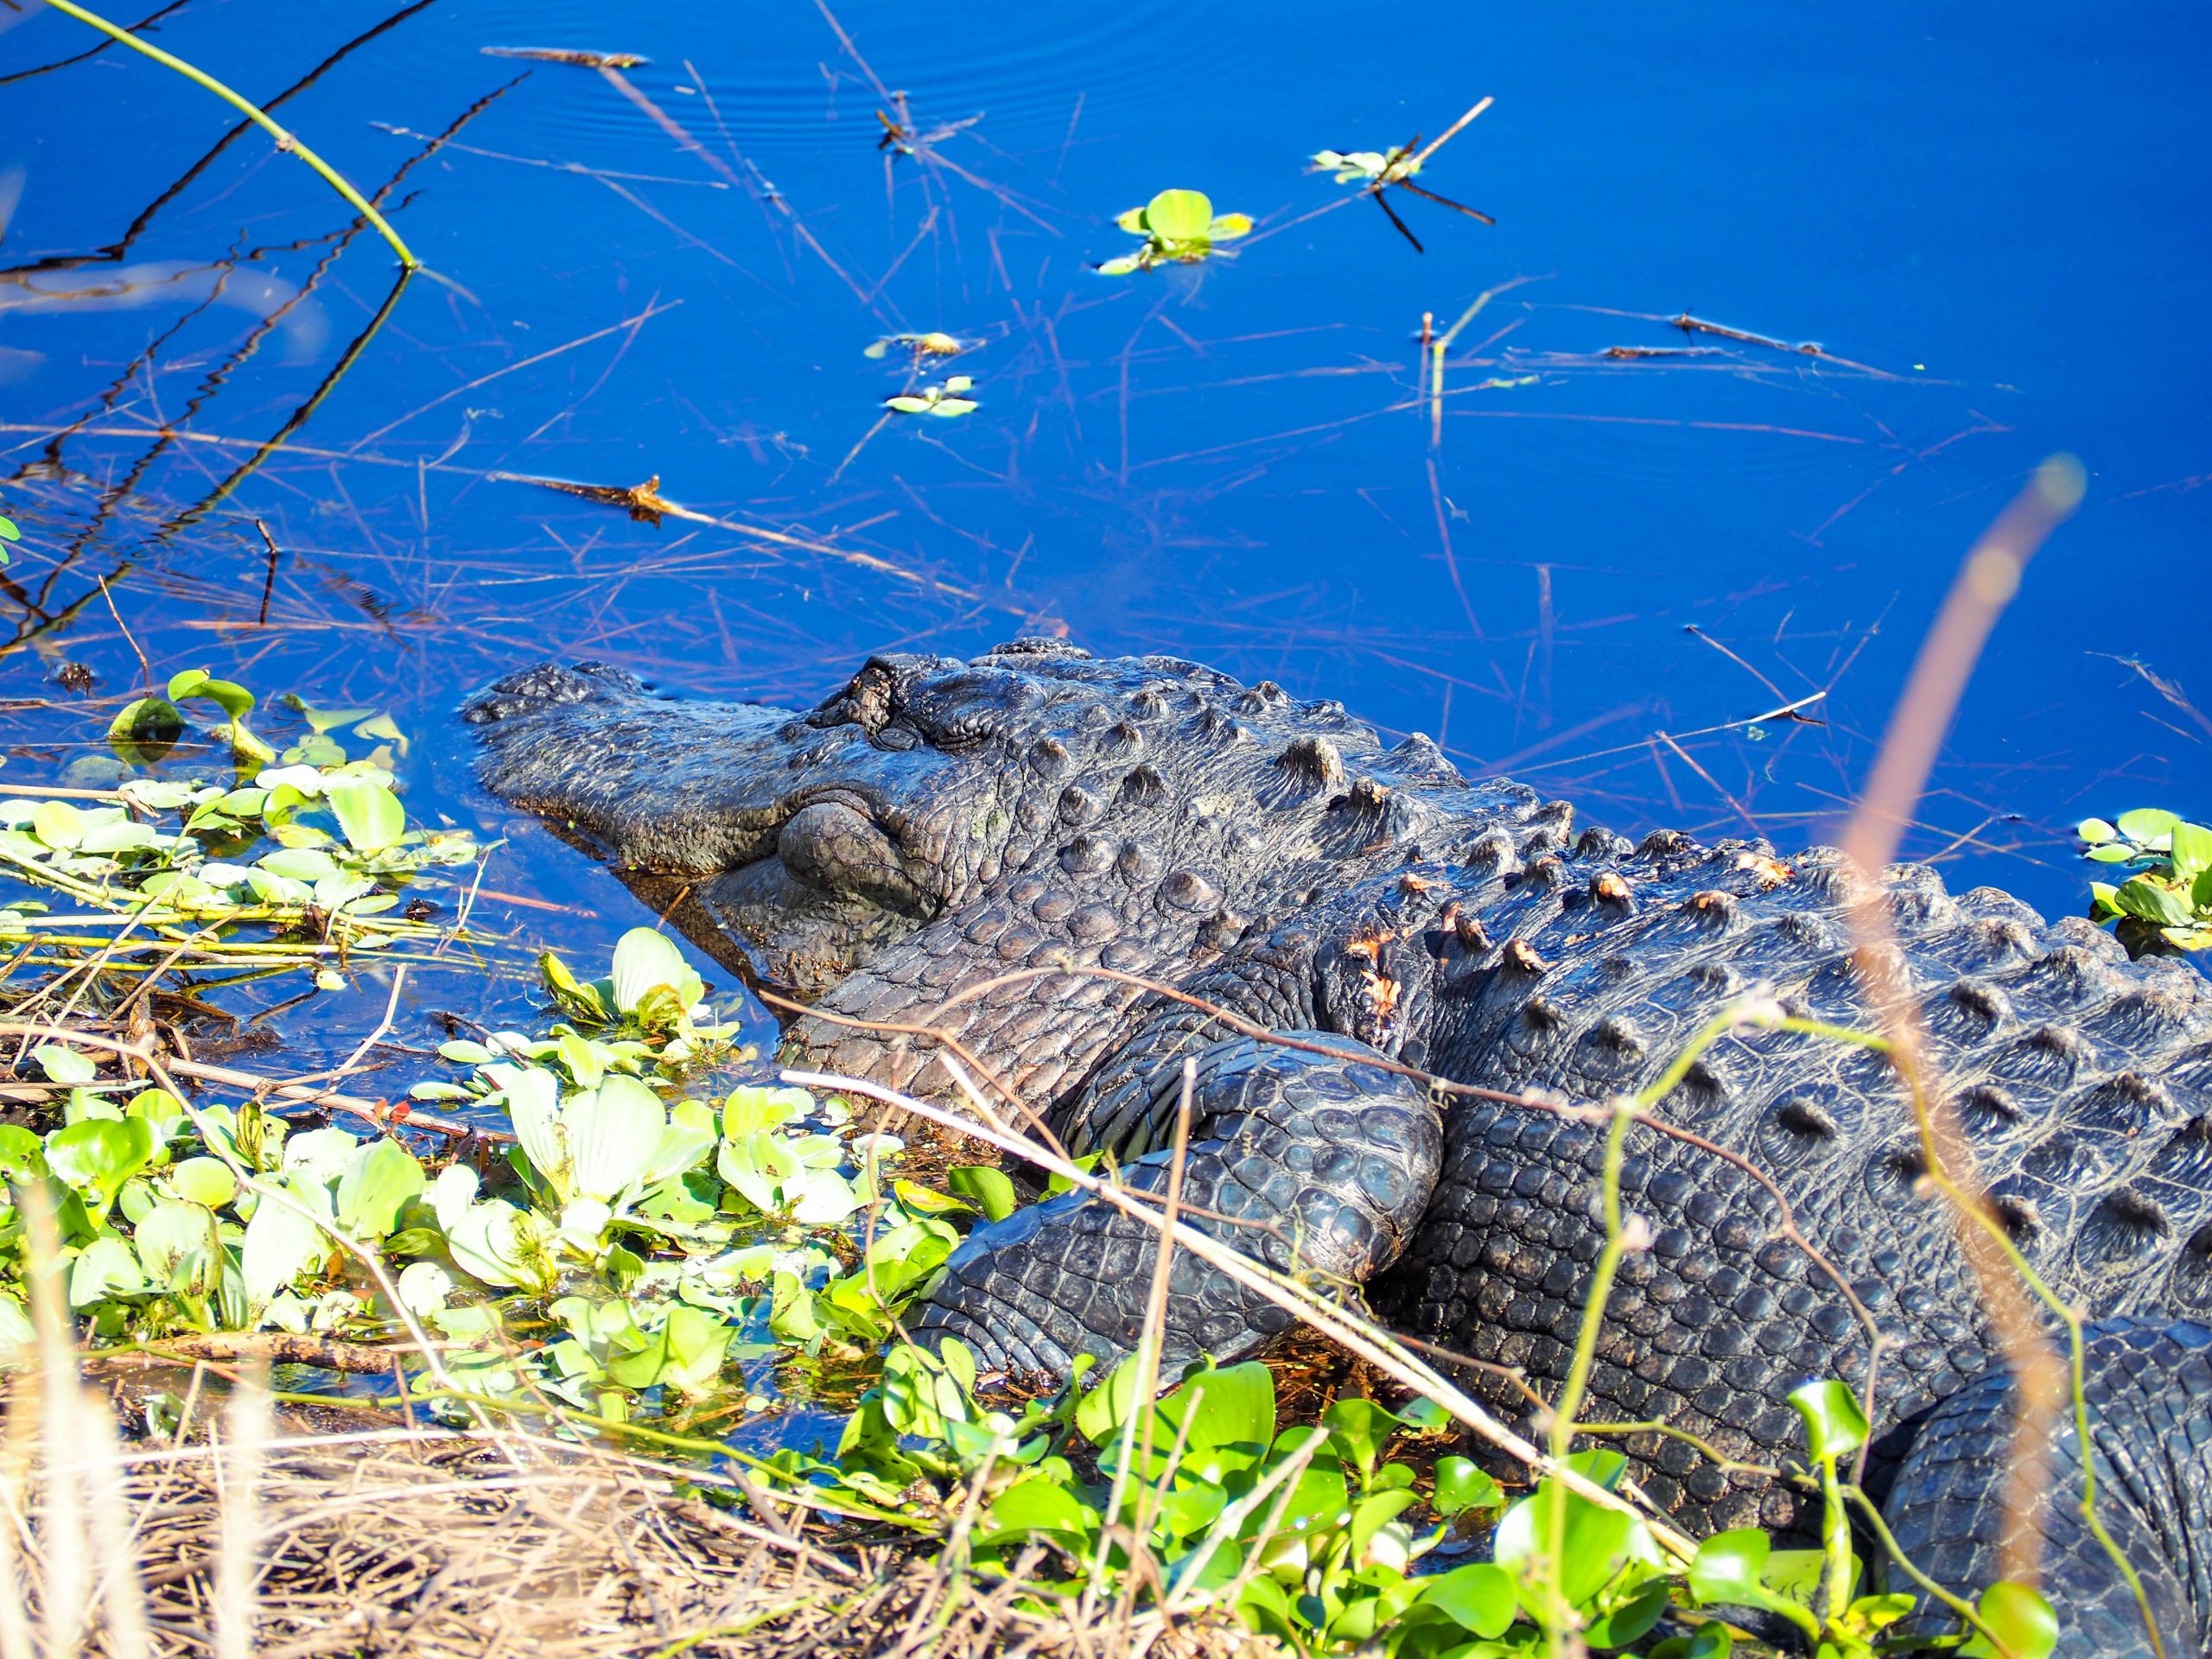 Myakka State Park alligator / 3 days in Sarasota, Florida / What to do in Sarasota, Where to eat in Sarasota, itinerary and information guide